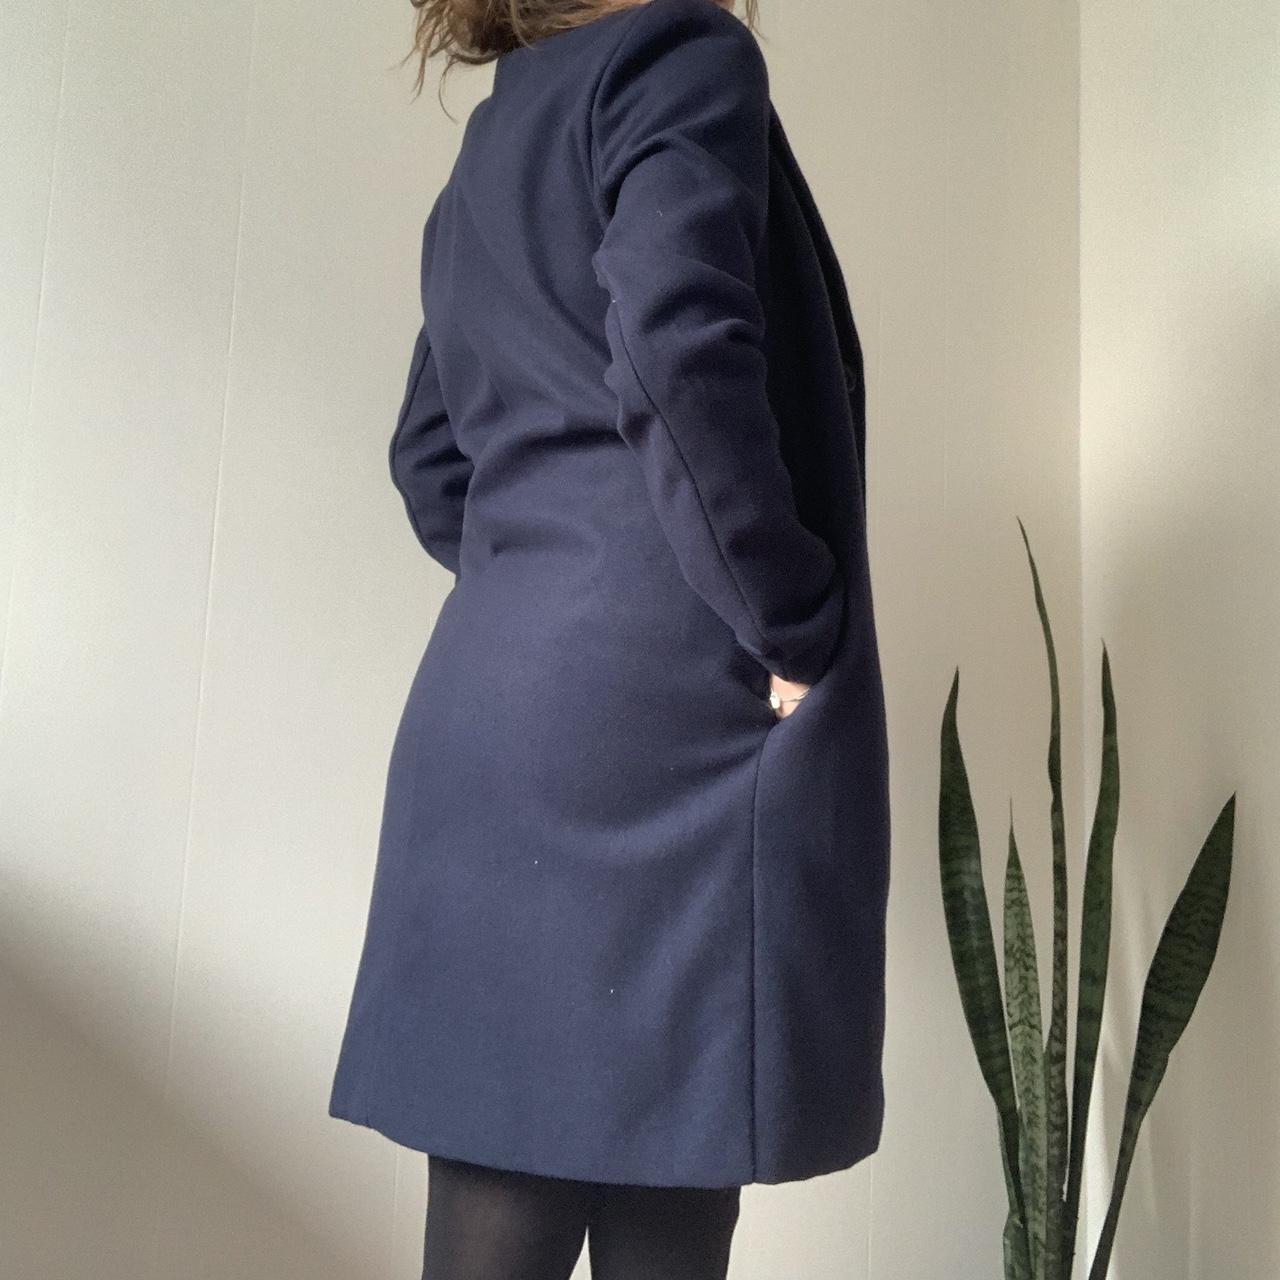 Women's Navy and Blue Jacket (3)